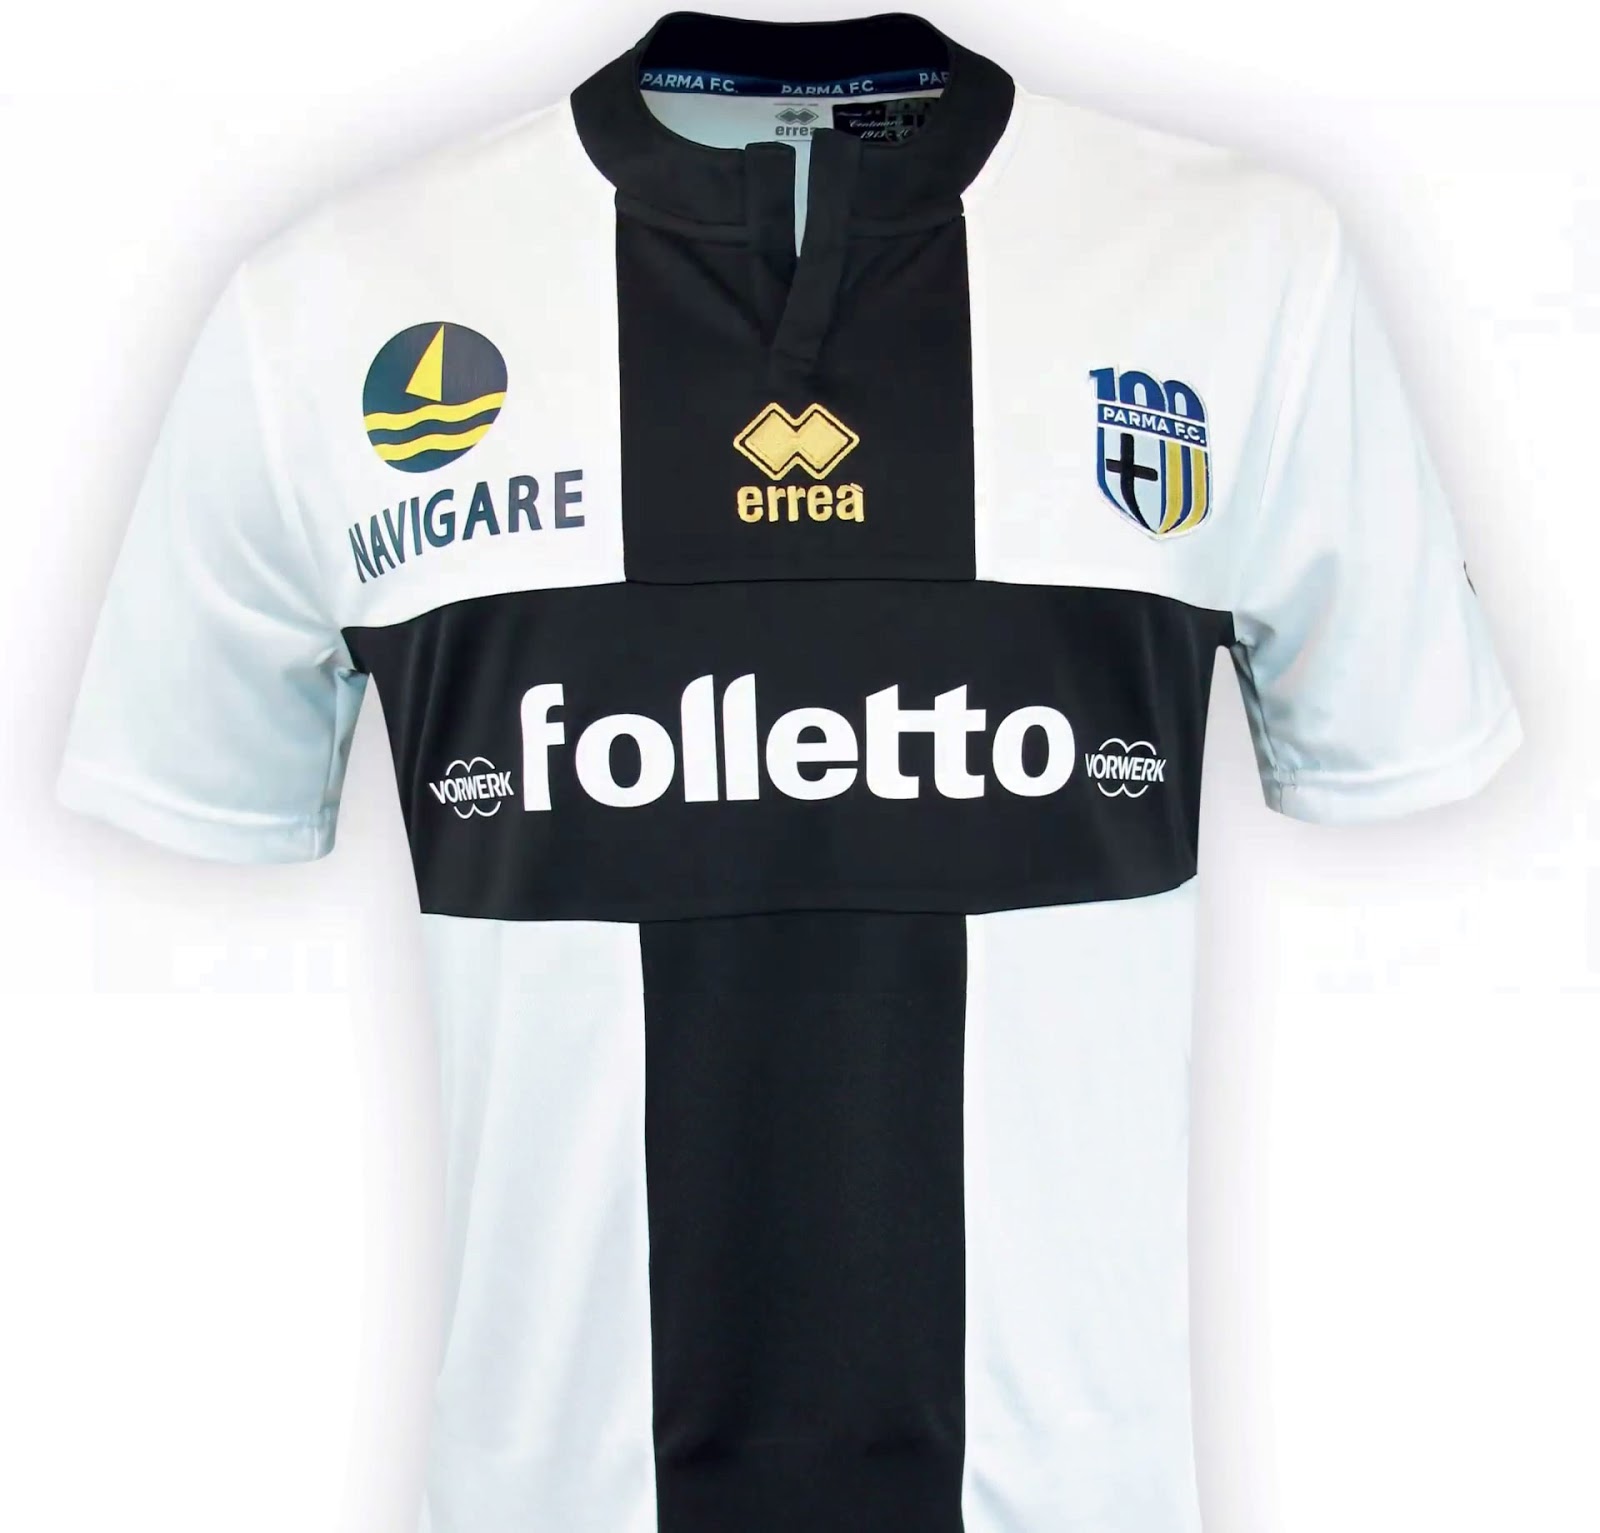 Serie A voetbalshirts 2013-2014